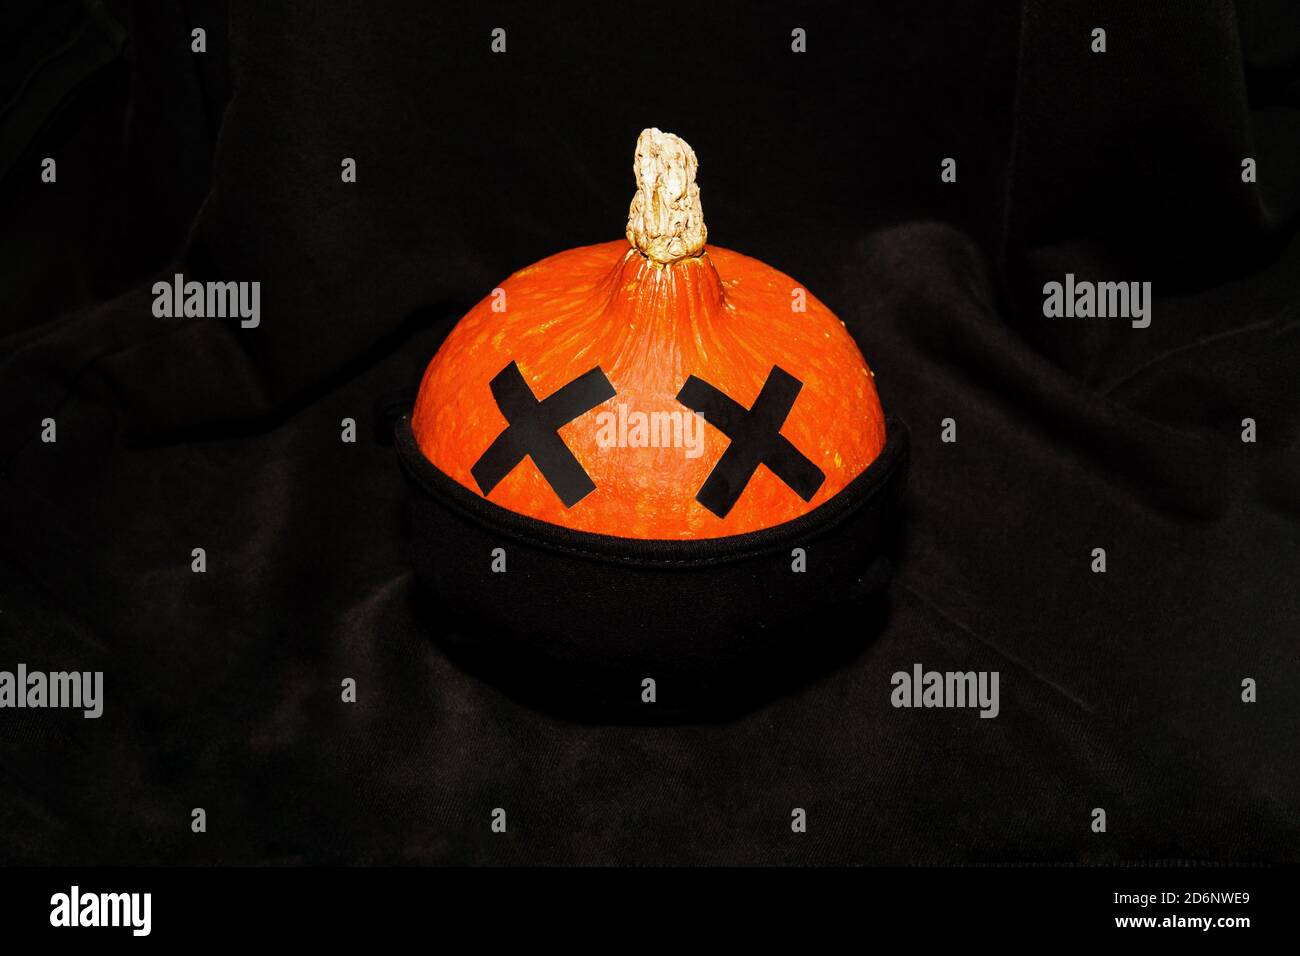 Halloween pumpkin with face mask on Stock Photo